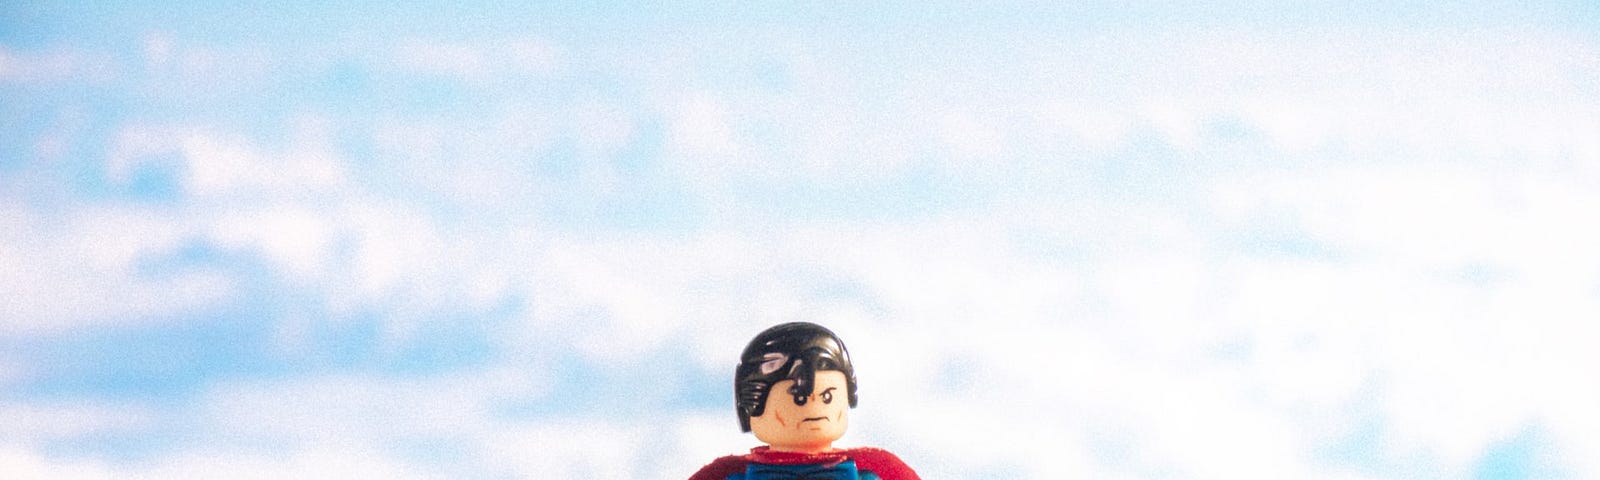 A lego Superman surrounded by white clouds, as if he’s hanging up there watching over the earth.